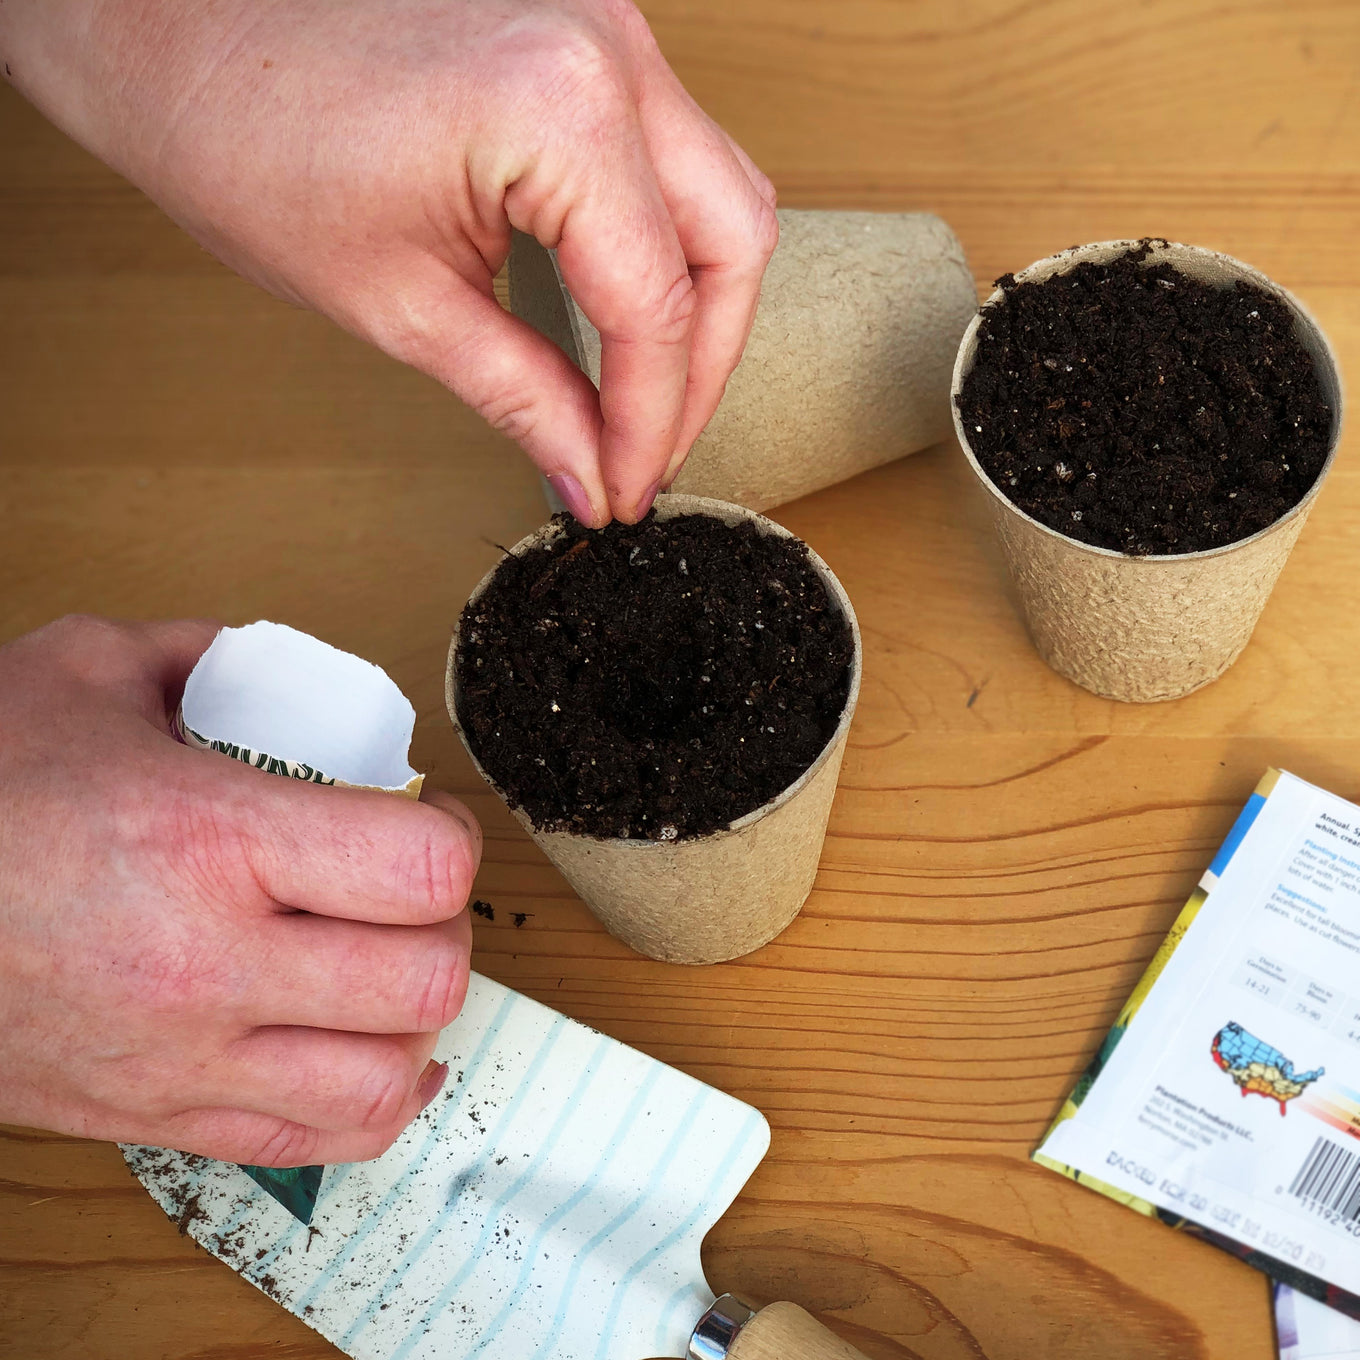 Sowing Organic Sweetie Tomato Seeds into Jiffy biodegradable seed starting peat pot filled with seed starting mix.